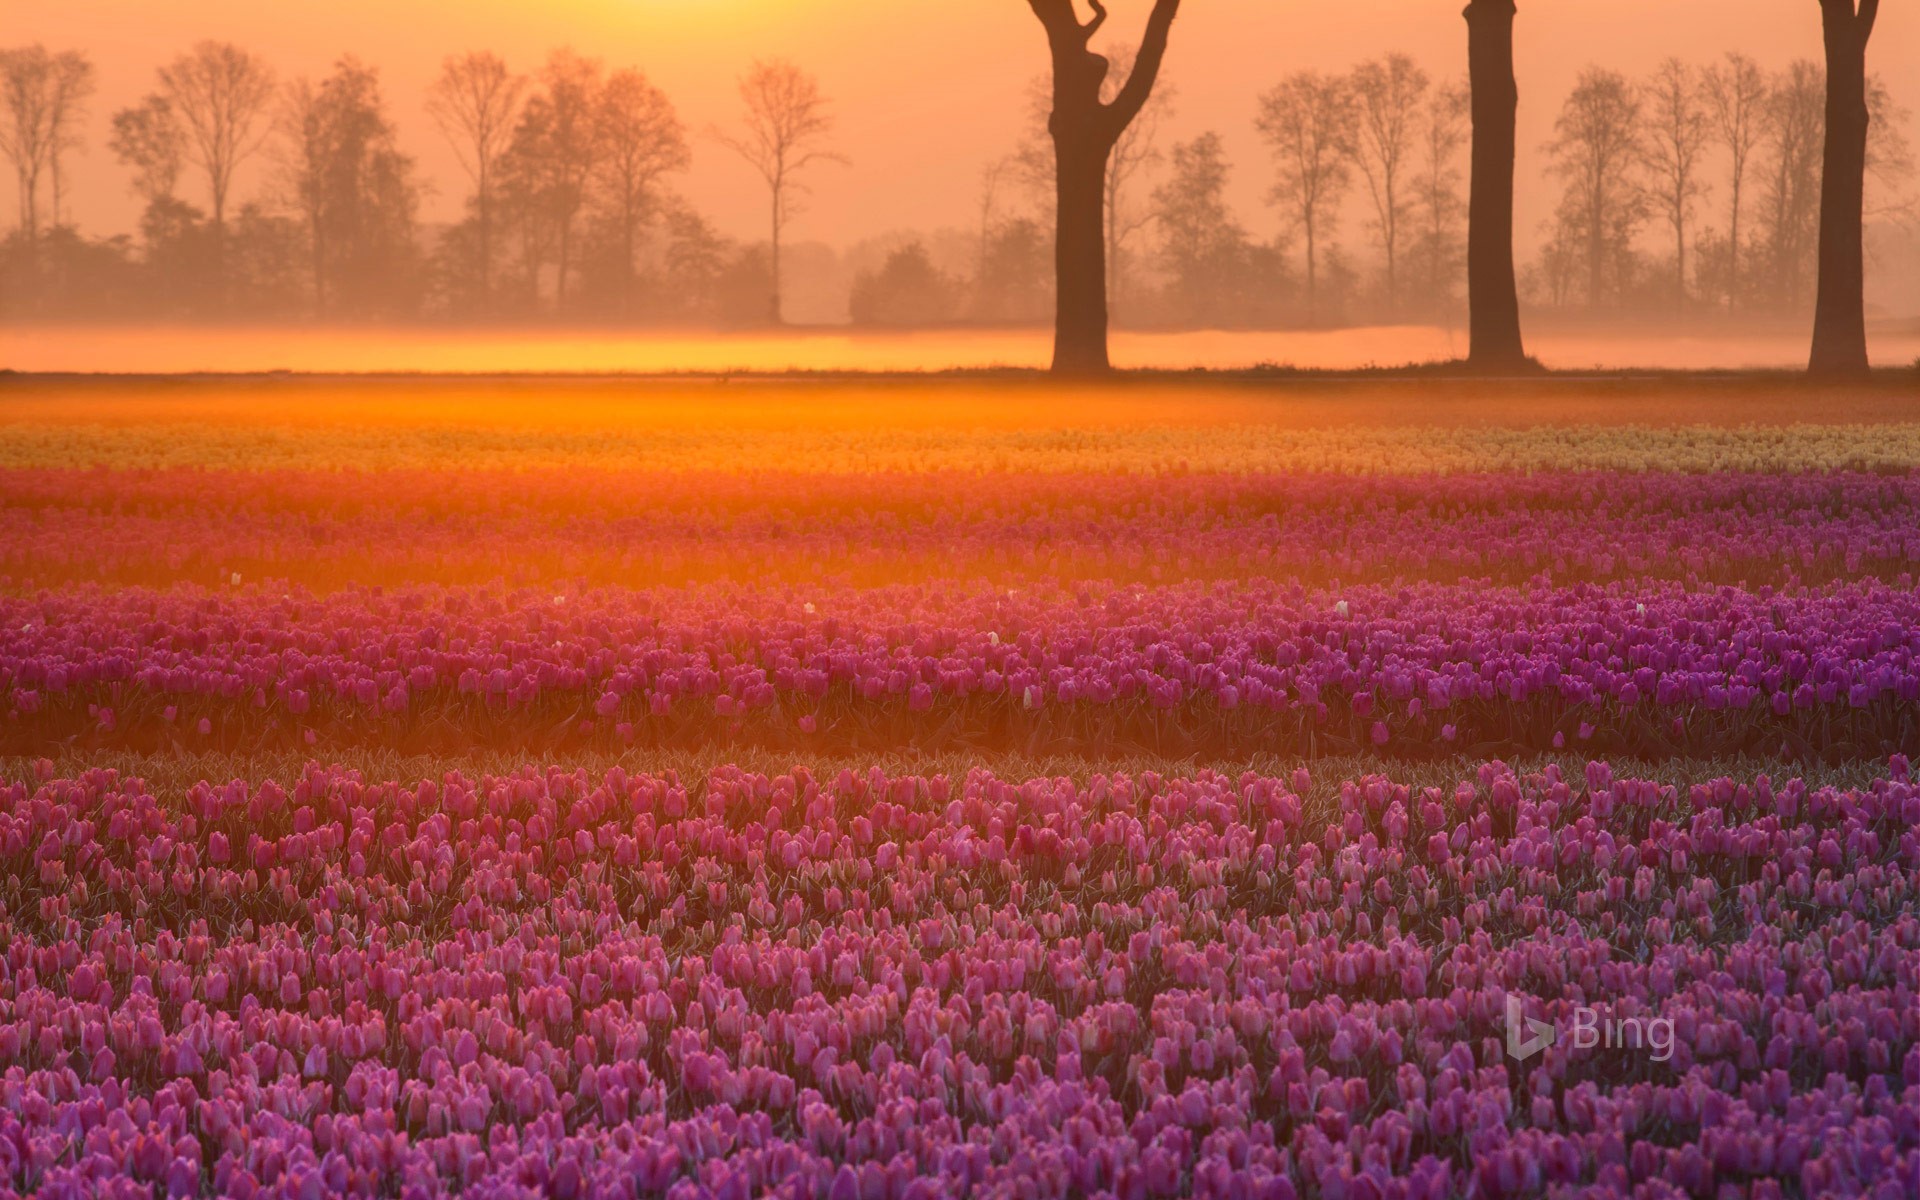 Tulips near the village of Grolloo in Drenthe province, Netherlands